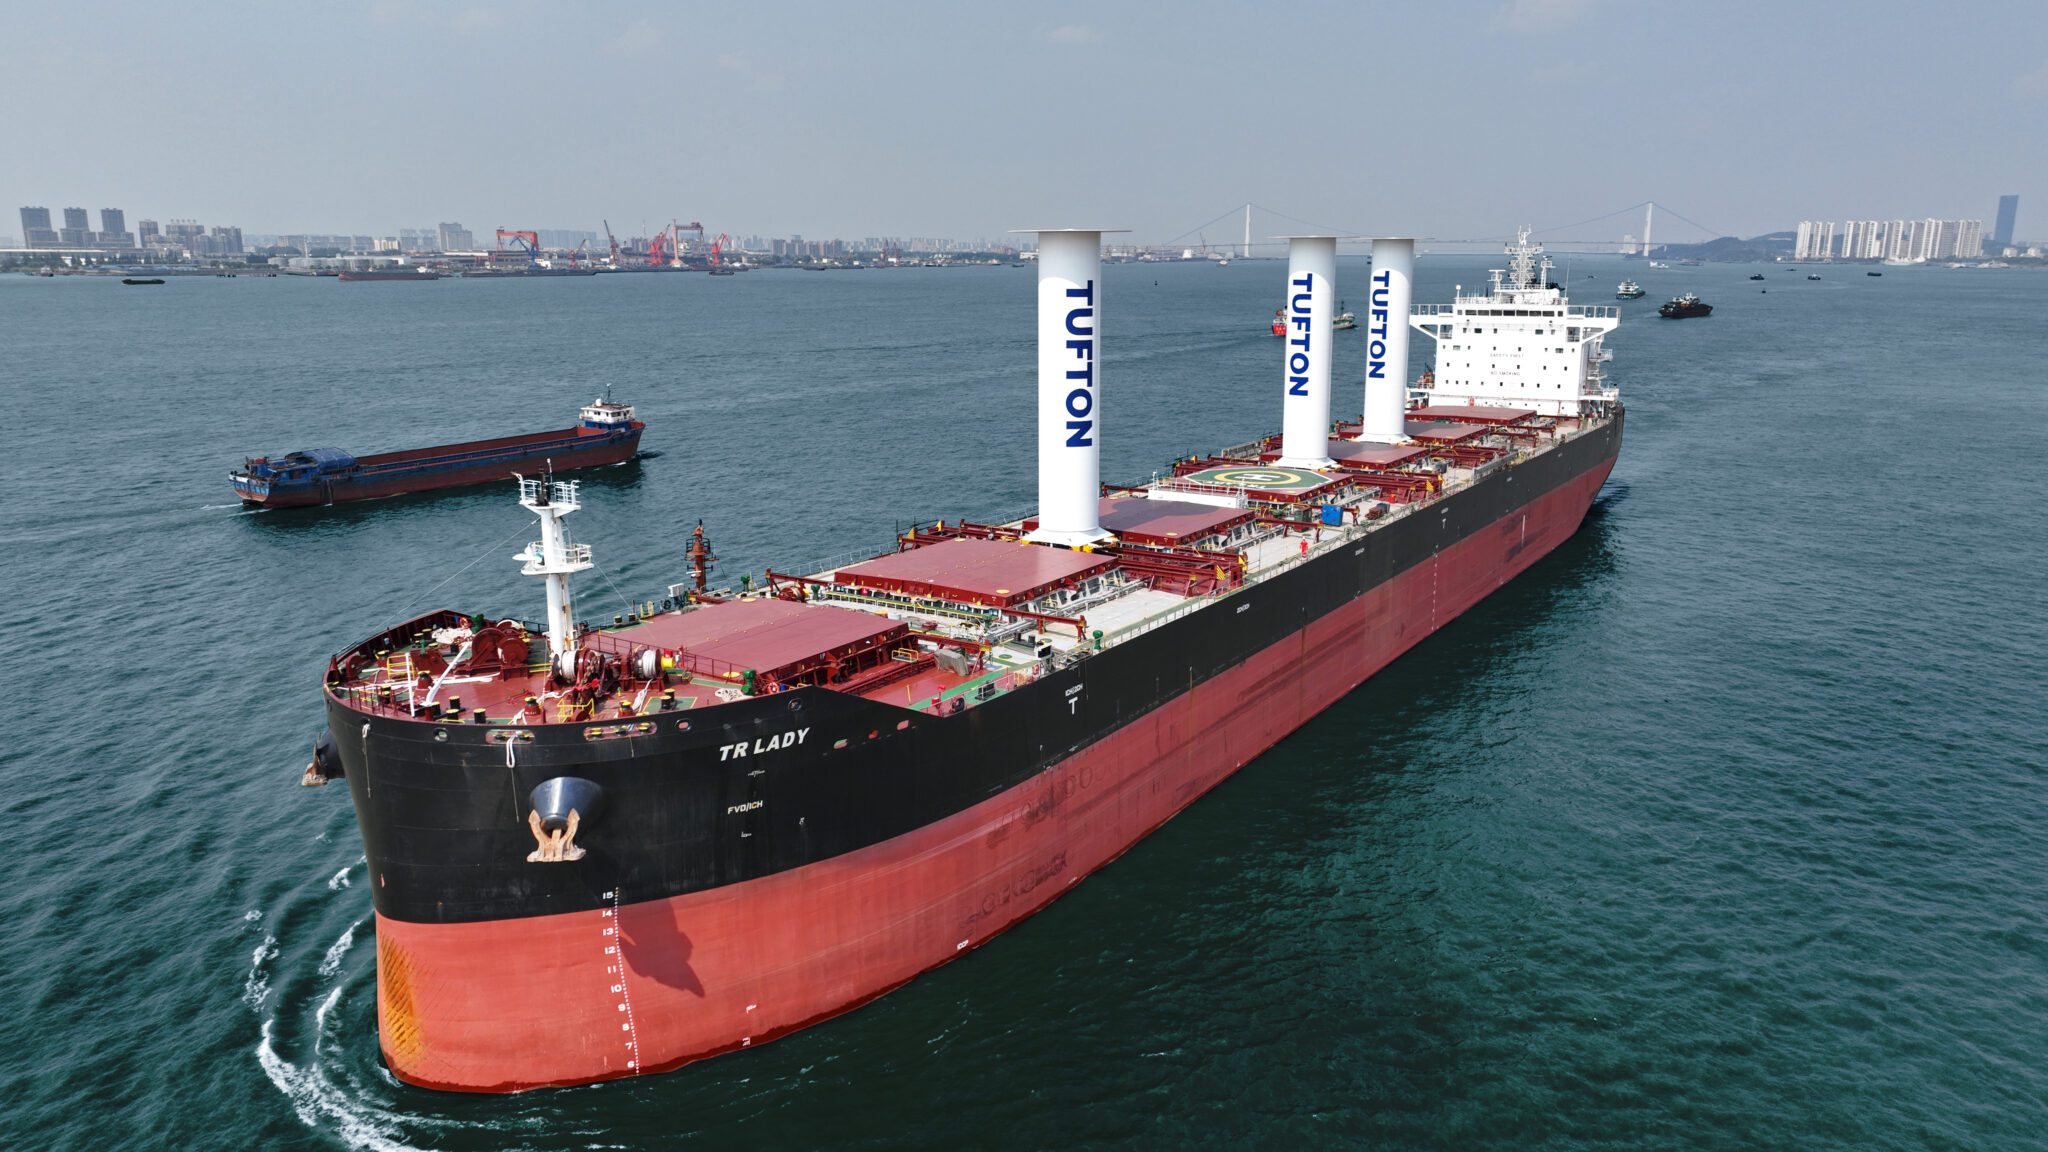 Tufton Kamsarmax Bulker Installed With Rotor Sails Saves 10% of Fuel